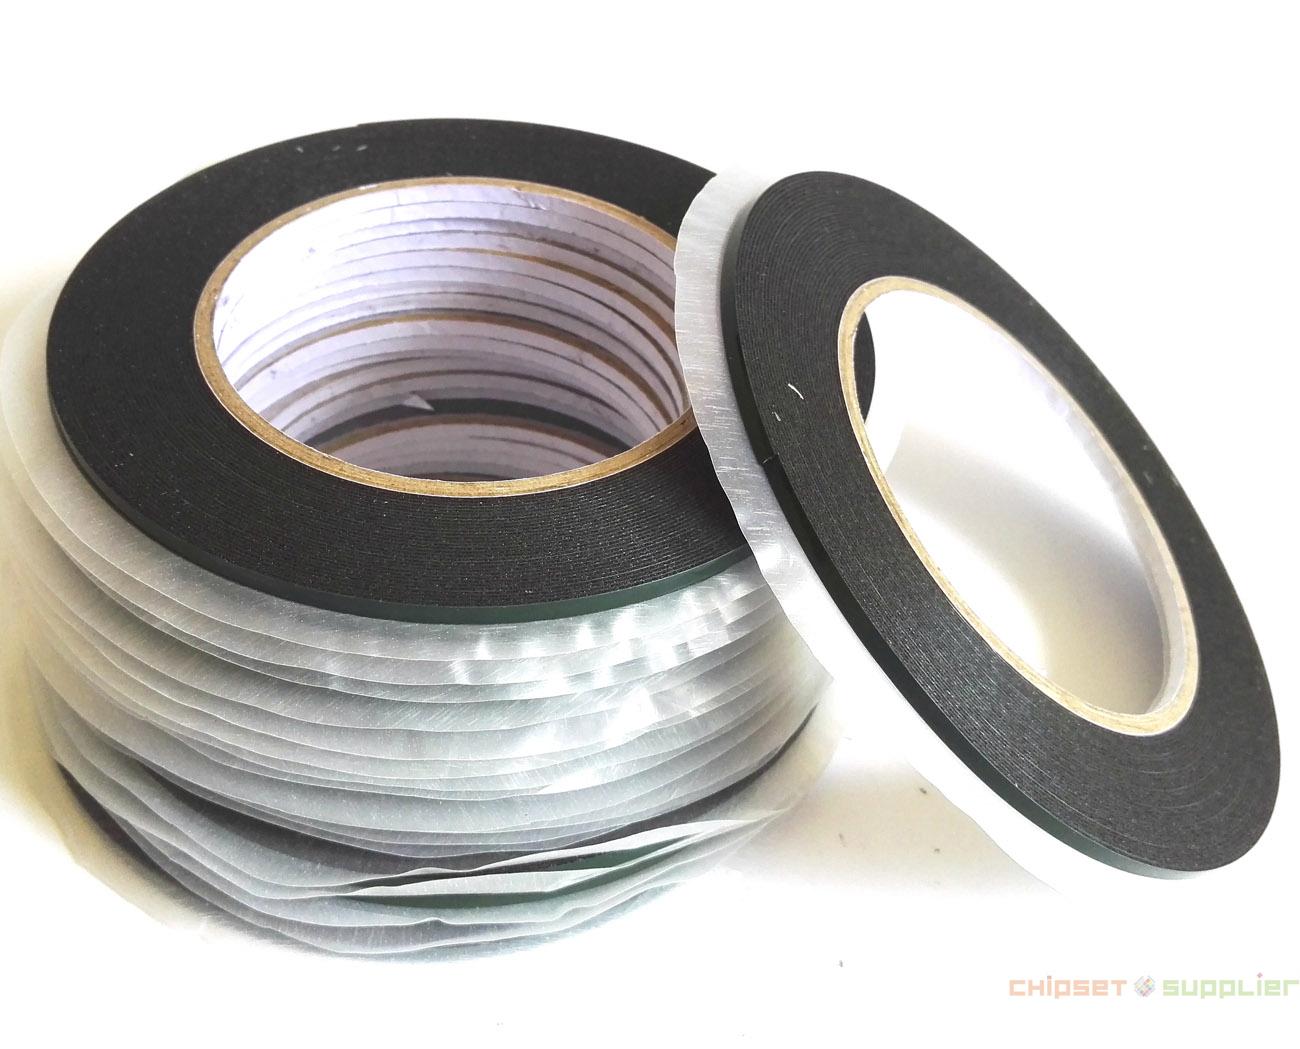 10 roll (0.5mm Thick) 9mm Double Sided Sticky Black Foam Sponge Tape Gasket for Phone Touch Screen PCB LCD Dust Proof